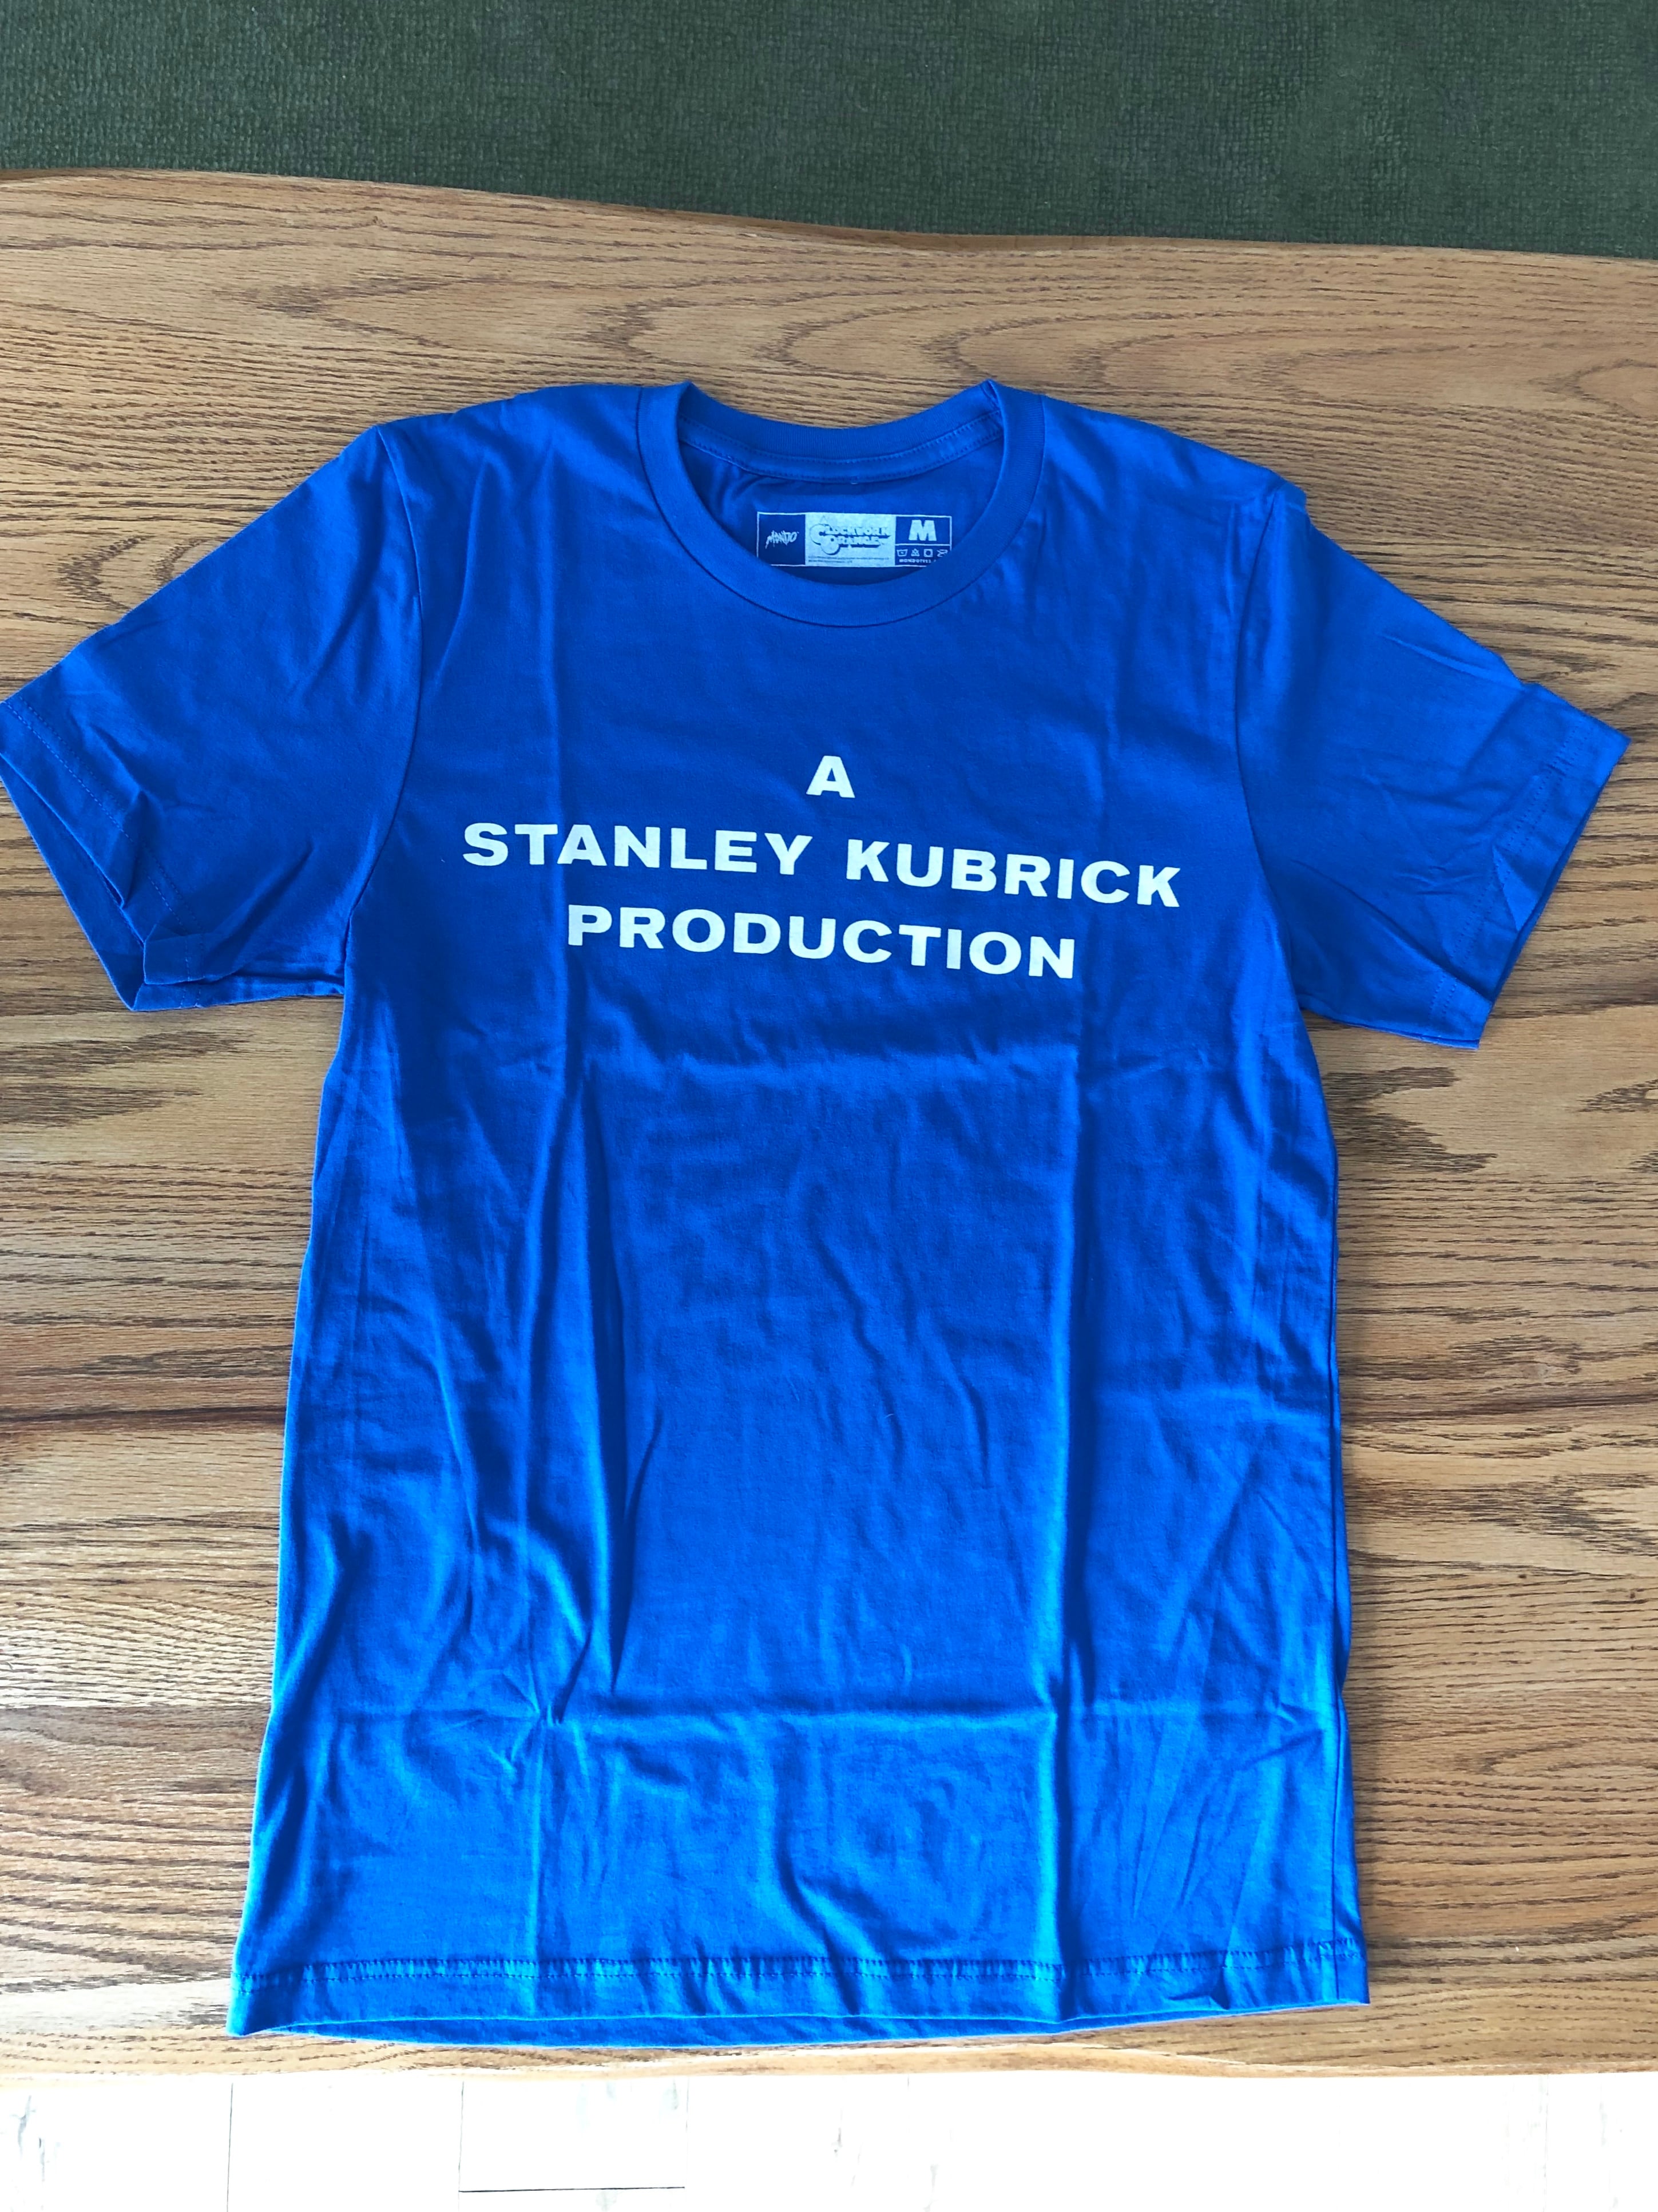 STANLEY KUBRICK production T-shirt | THE HOOK TAILOR'S LOUNGE powered by  BASE